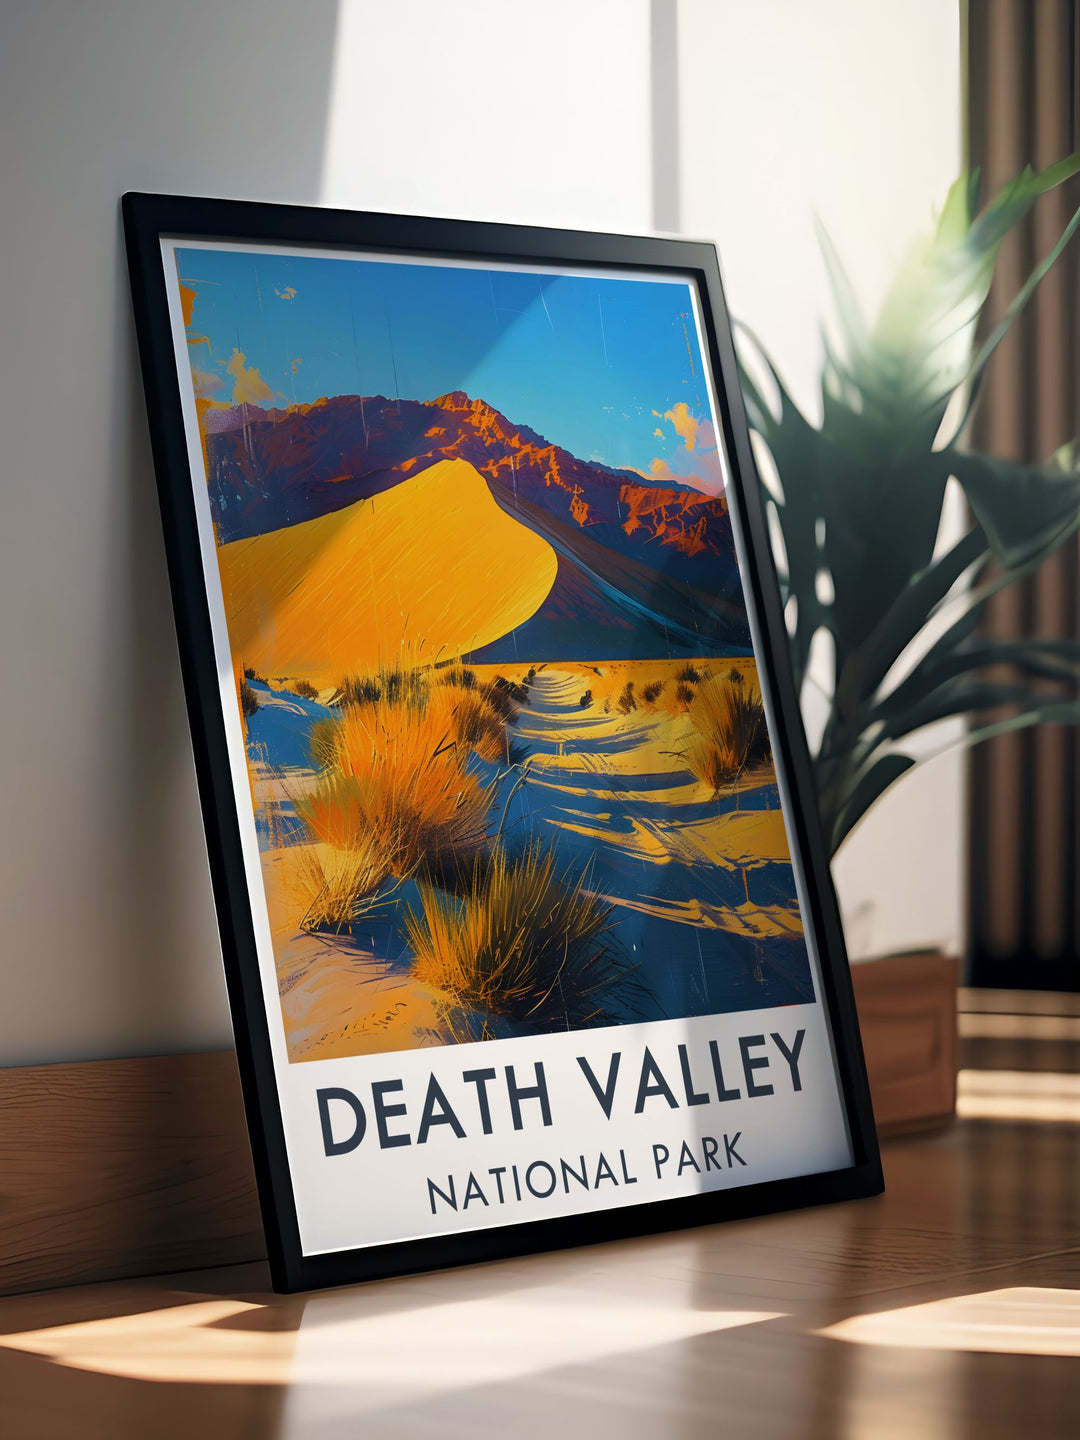 Vintage poster highlighting the stark beauty of Death Valleys desert landscape, featuring the parks iconic sand dunes and rugged terrain.